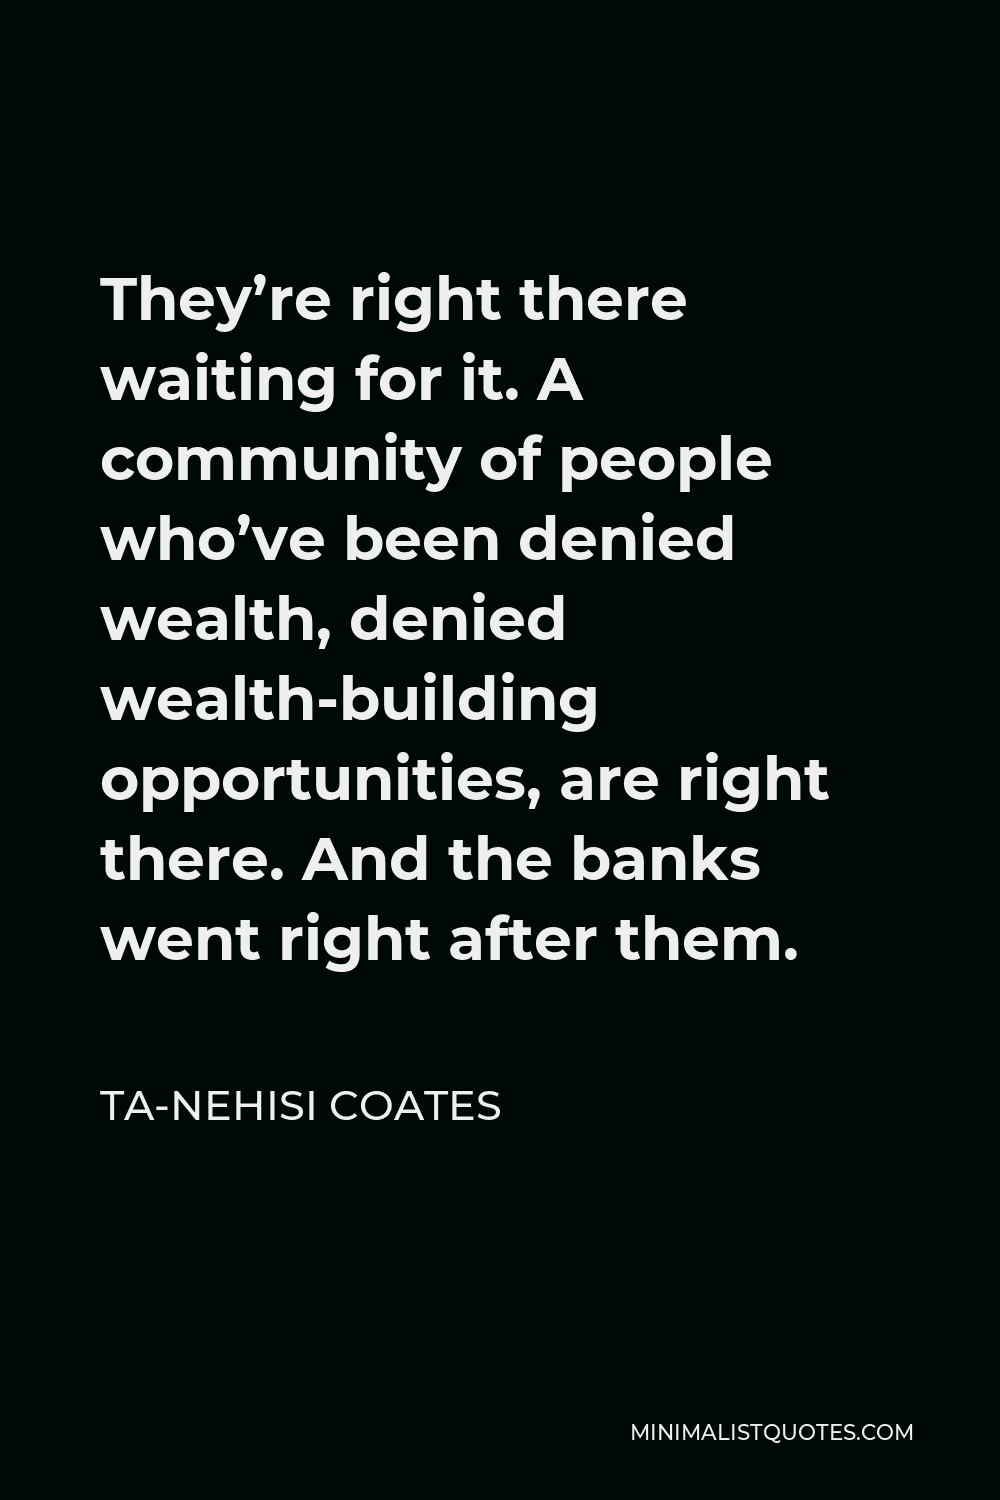 Ta-Nehisi Coates Quote - They’re right there waiting for it. A community of people who’ve been denied wealth, denied wealth-building opportunities, are right there. And the banks went right after them.